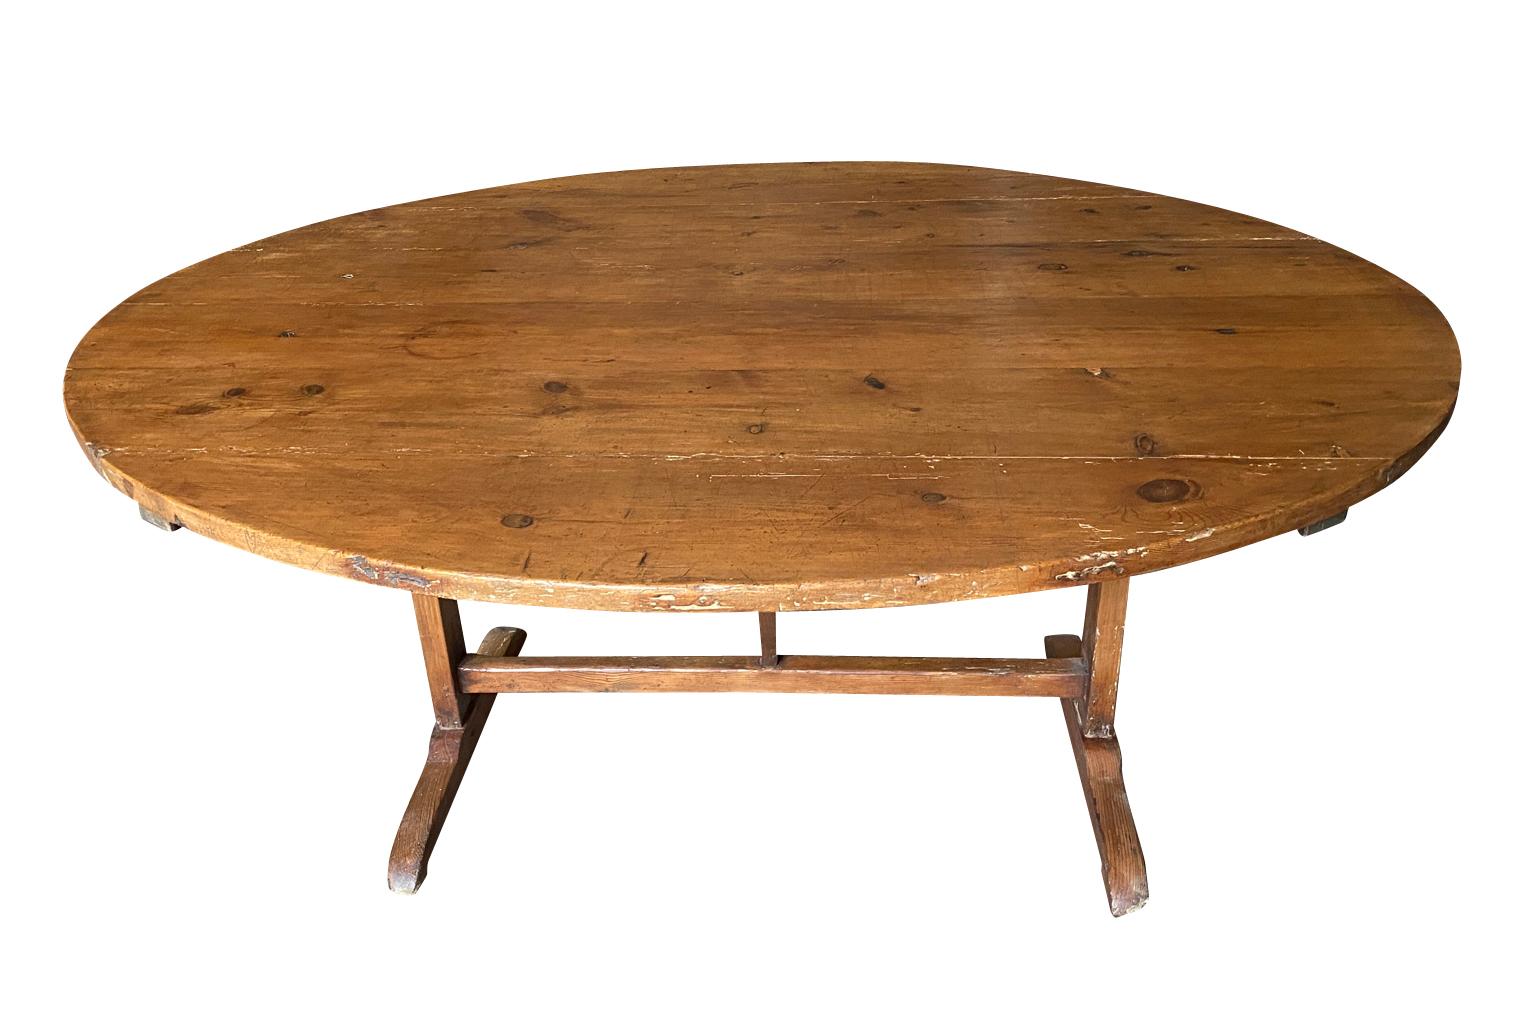 A very handsome 19th century oval shaped Wine Tasting Table - Table Vigneron - from the Provence region of France.  Beautifully constructed from handsomely stained pine with a tilting top.  Perfect as a relaxed dining table.  Wonderful patina.